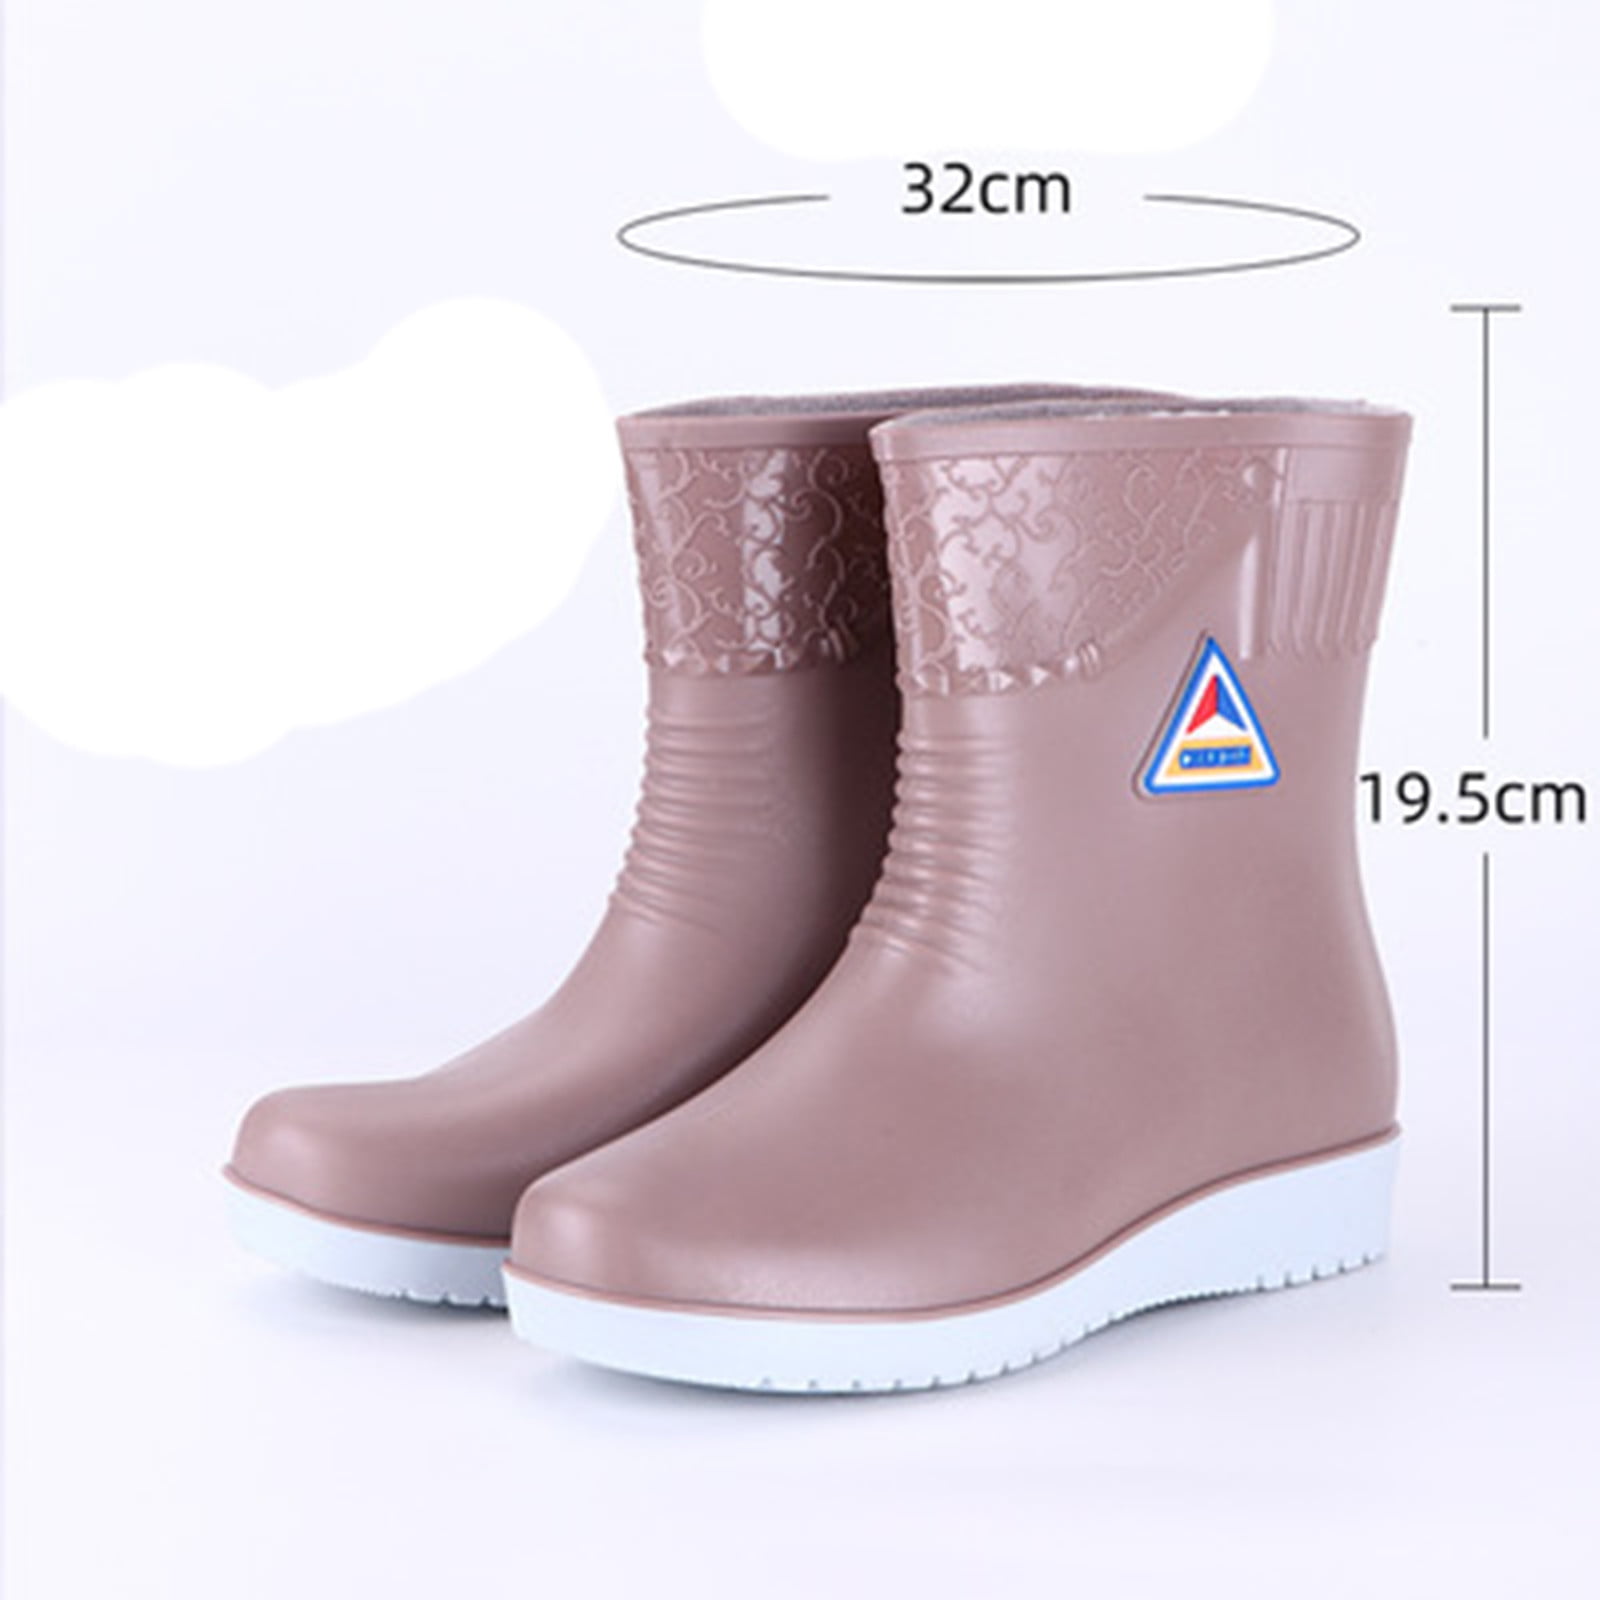 Womens Flats Non-Slip Round Toe Athletic Shoes Waterproof Galoshes Rain Boots 